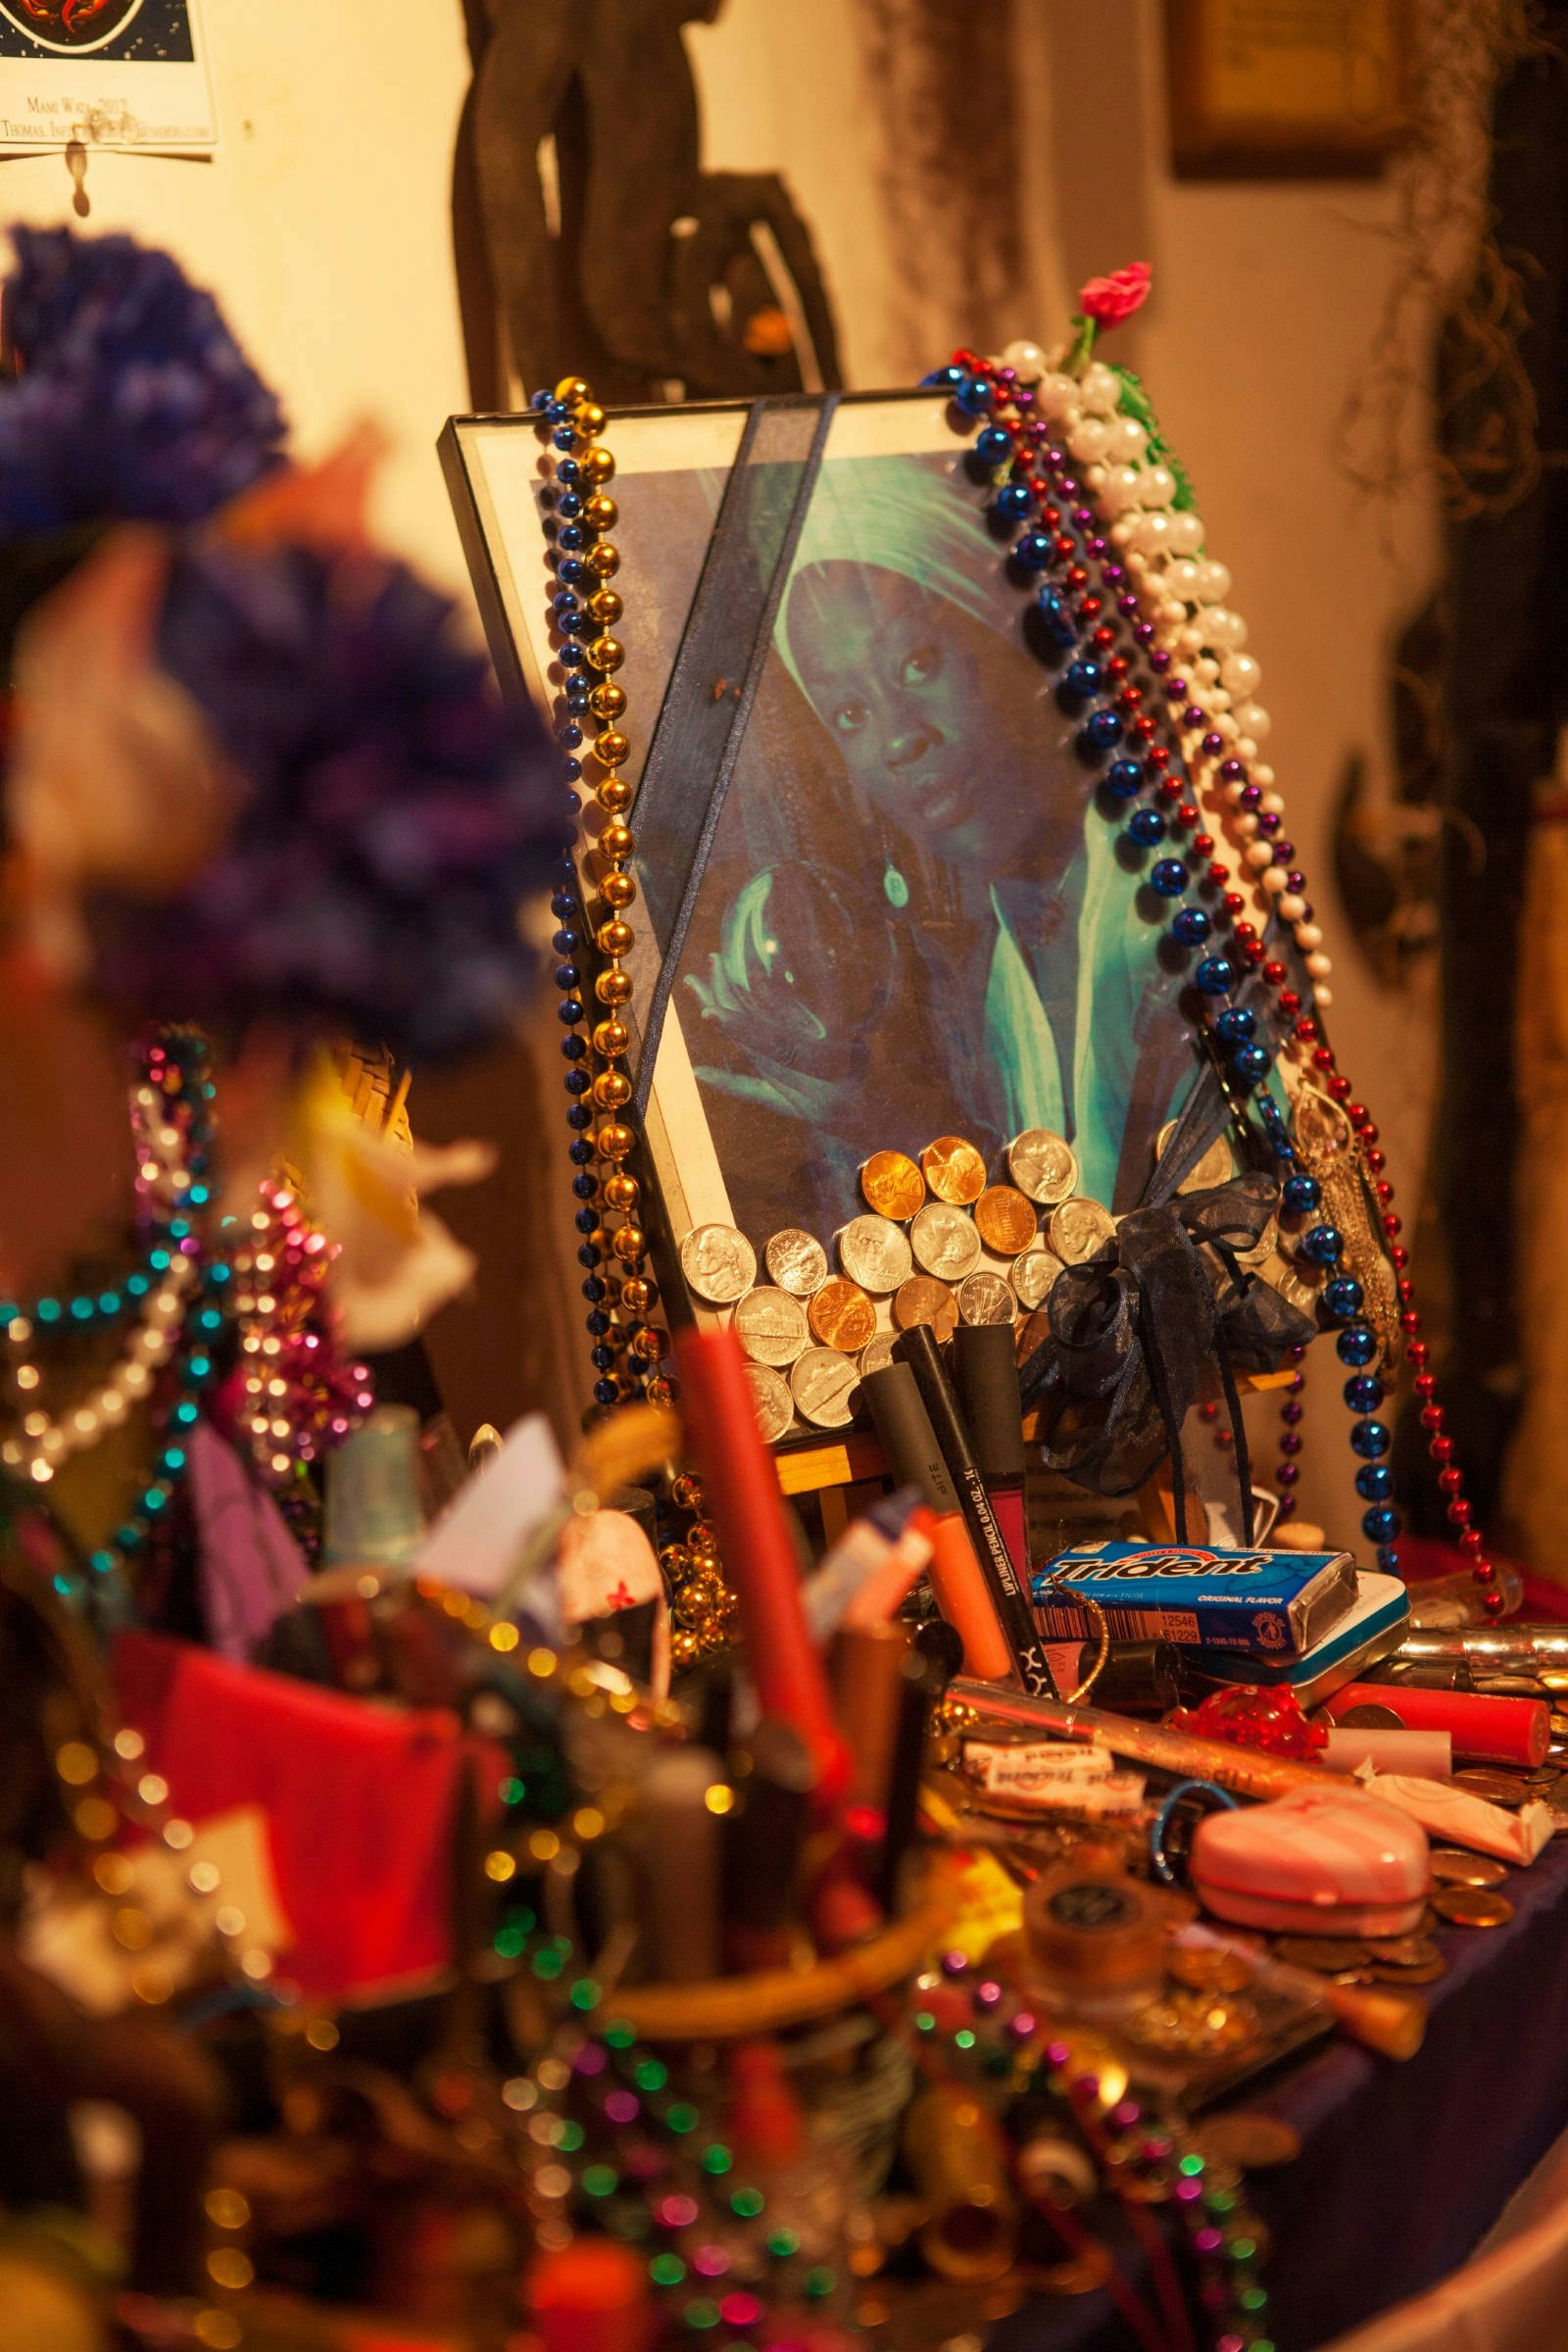 A framed picture stands in the middle of an altar with a photo of a woman with long fingernails in a white turban, clothes and earrings holding a crystal ball. Strings of beads surround it, along with coins, gum packets, pens and a heart-shaped box.